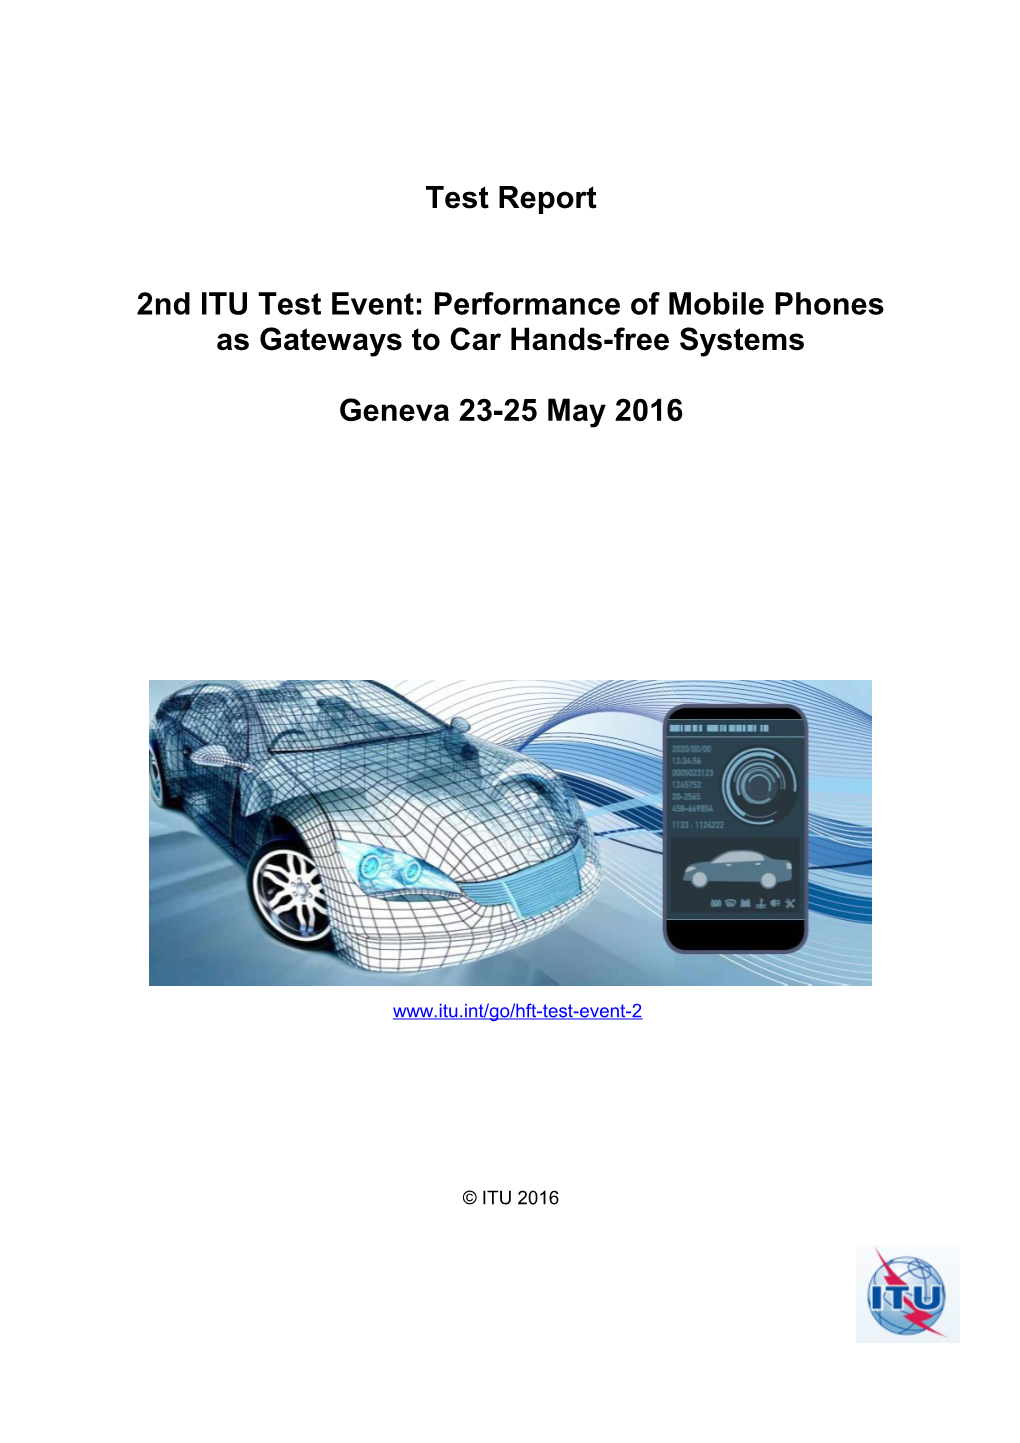 2Nd ITU Test Event: Performance of Mobile Phones As Gateways to Car Hands-Free Systems